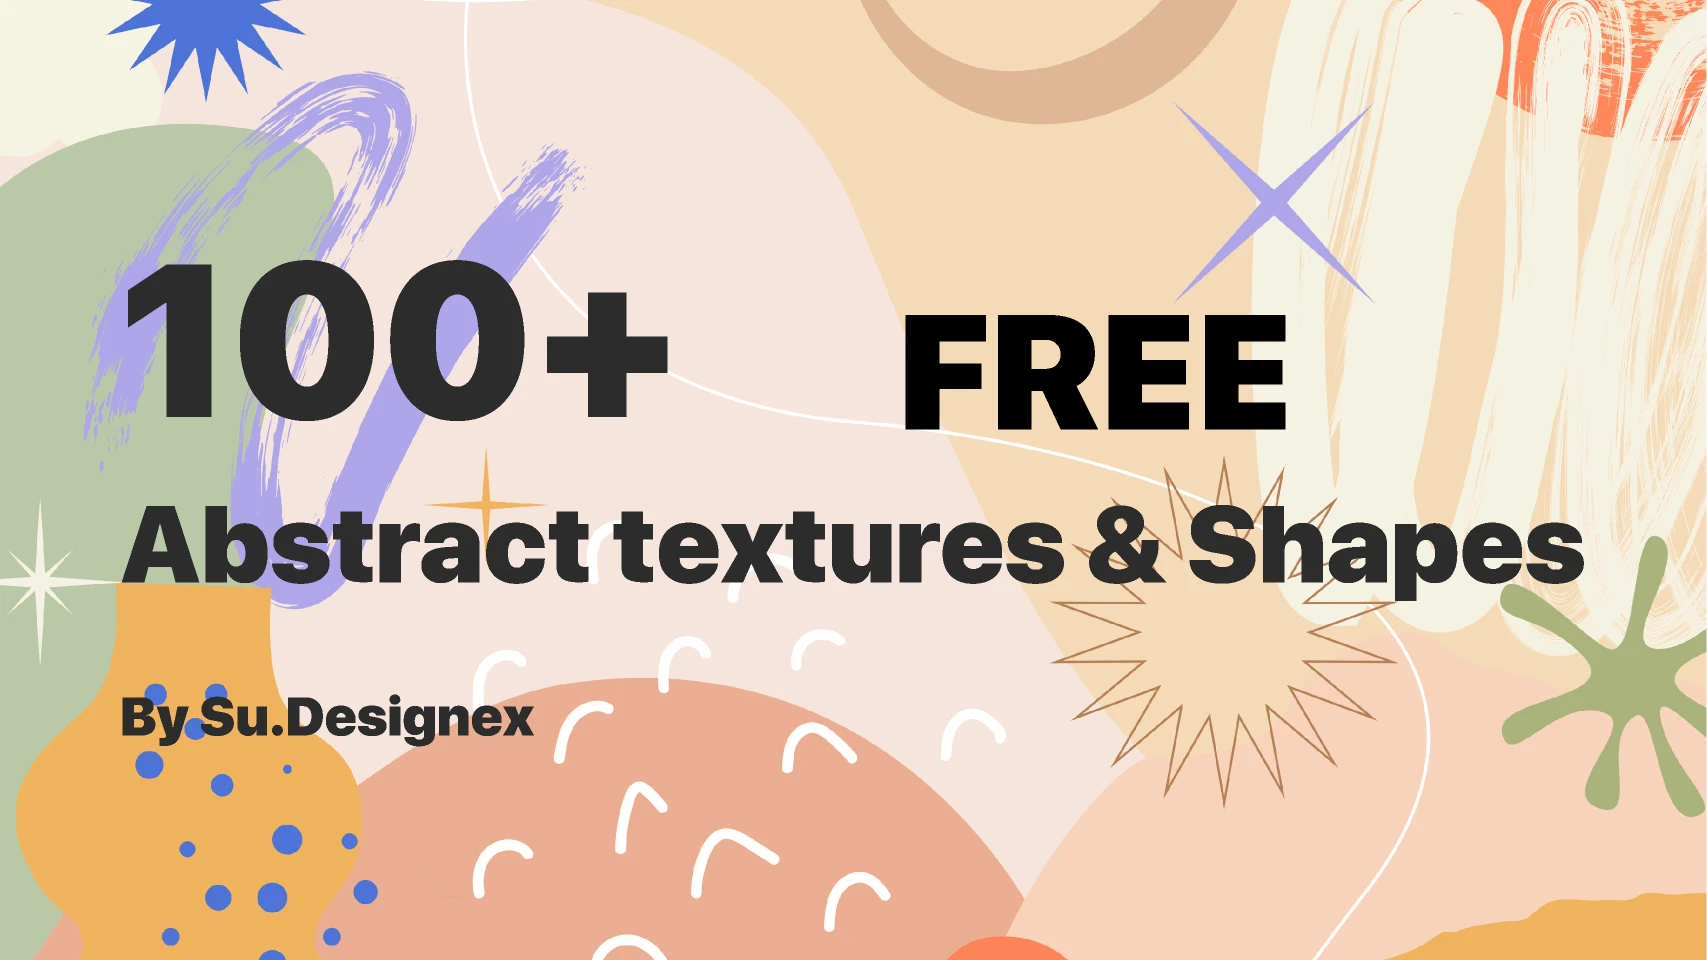 100+ Free Abstract textures & shapes for Figma and Adobe XD